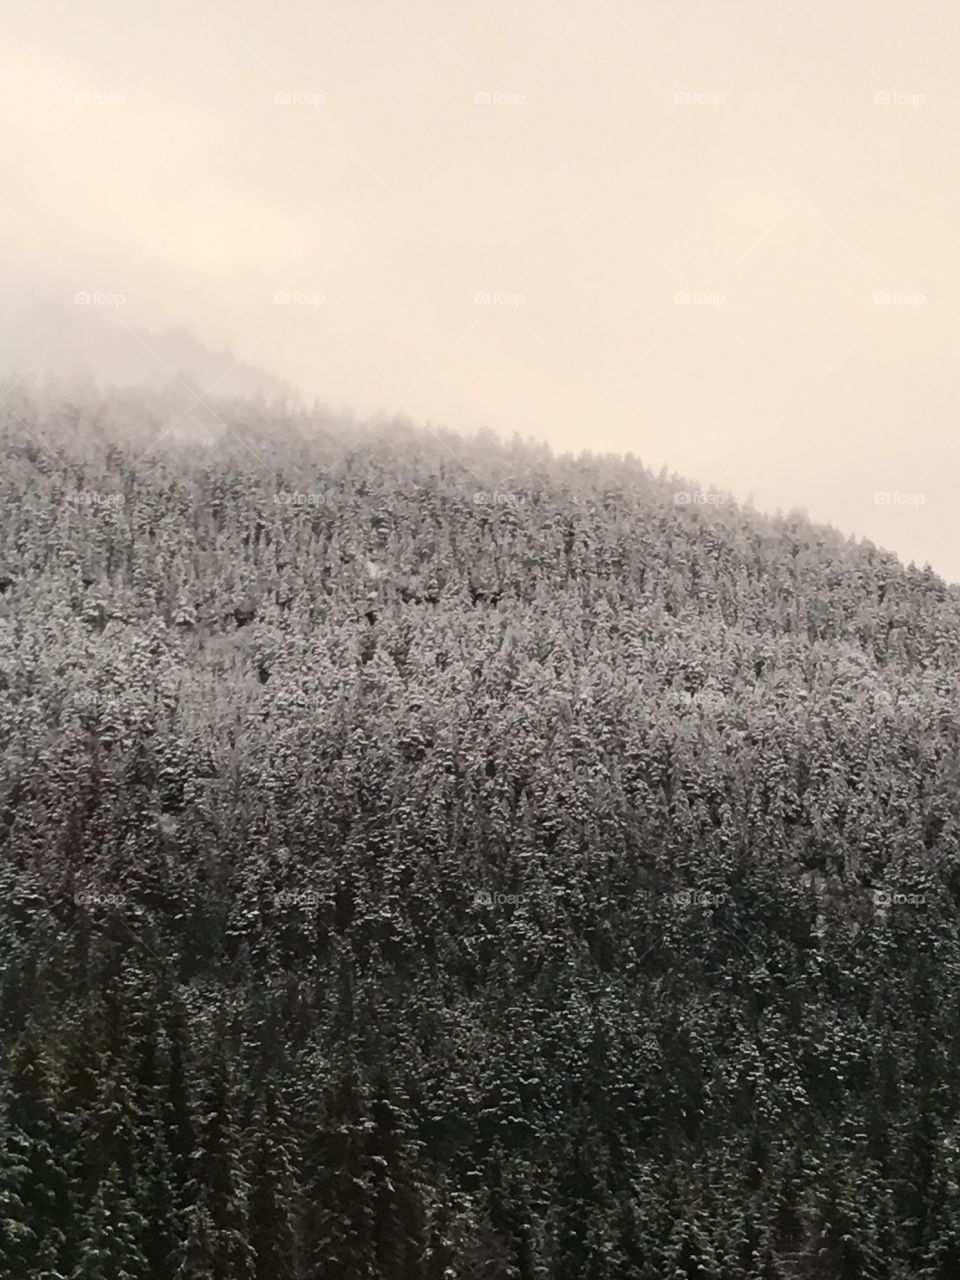 Misty mountaintop covered in frosty trees